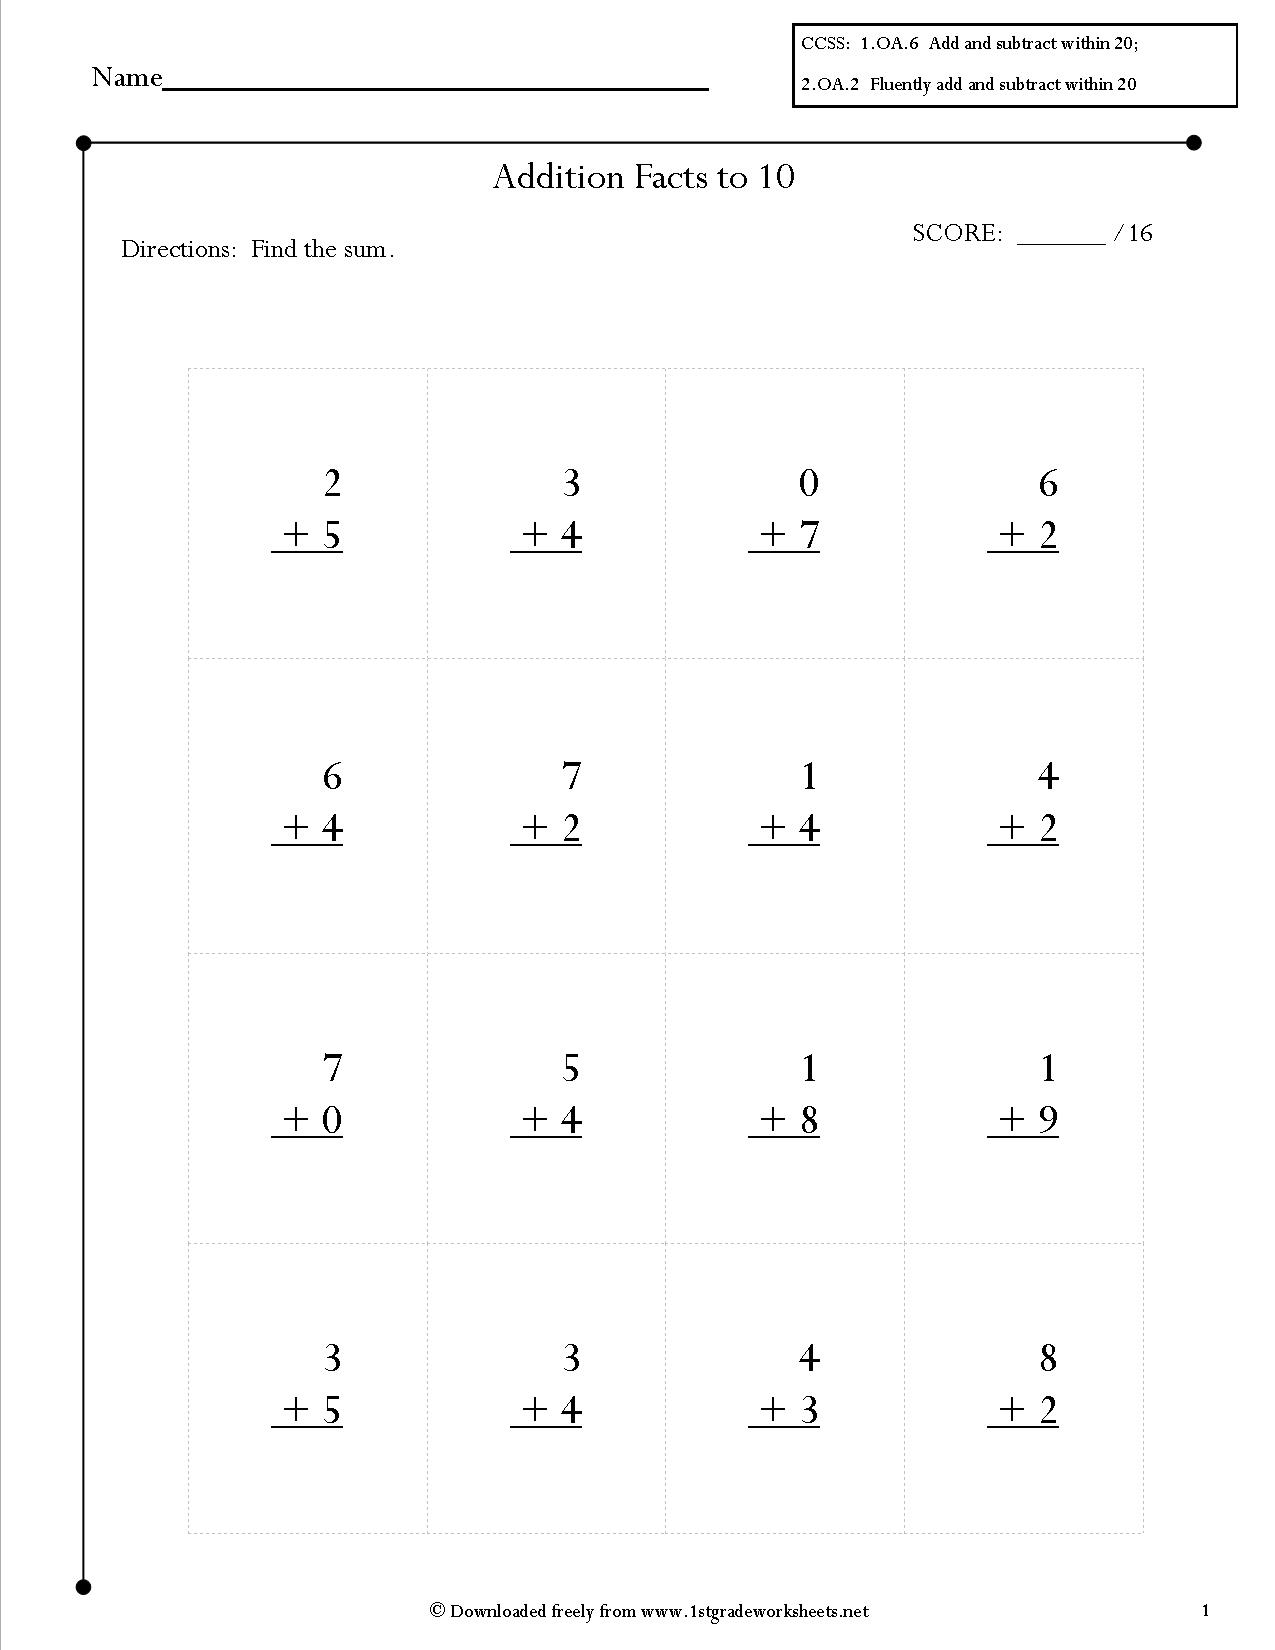 14 Best Images of Addition Facts Worksheets - First Grade ...